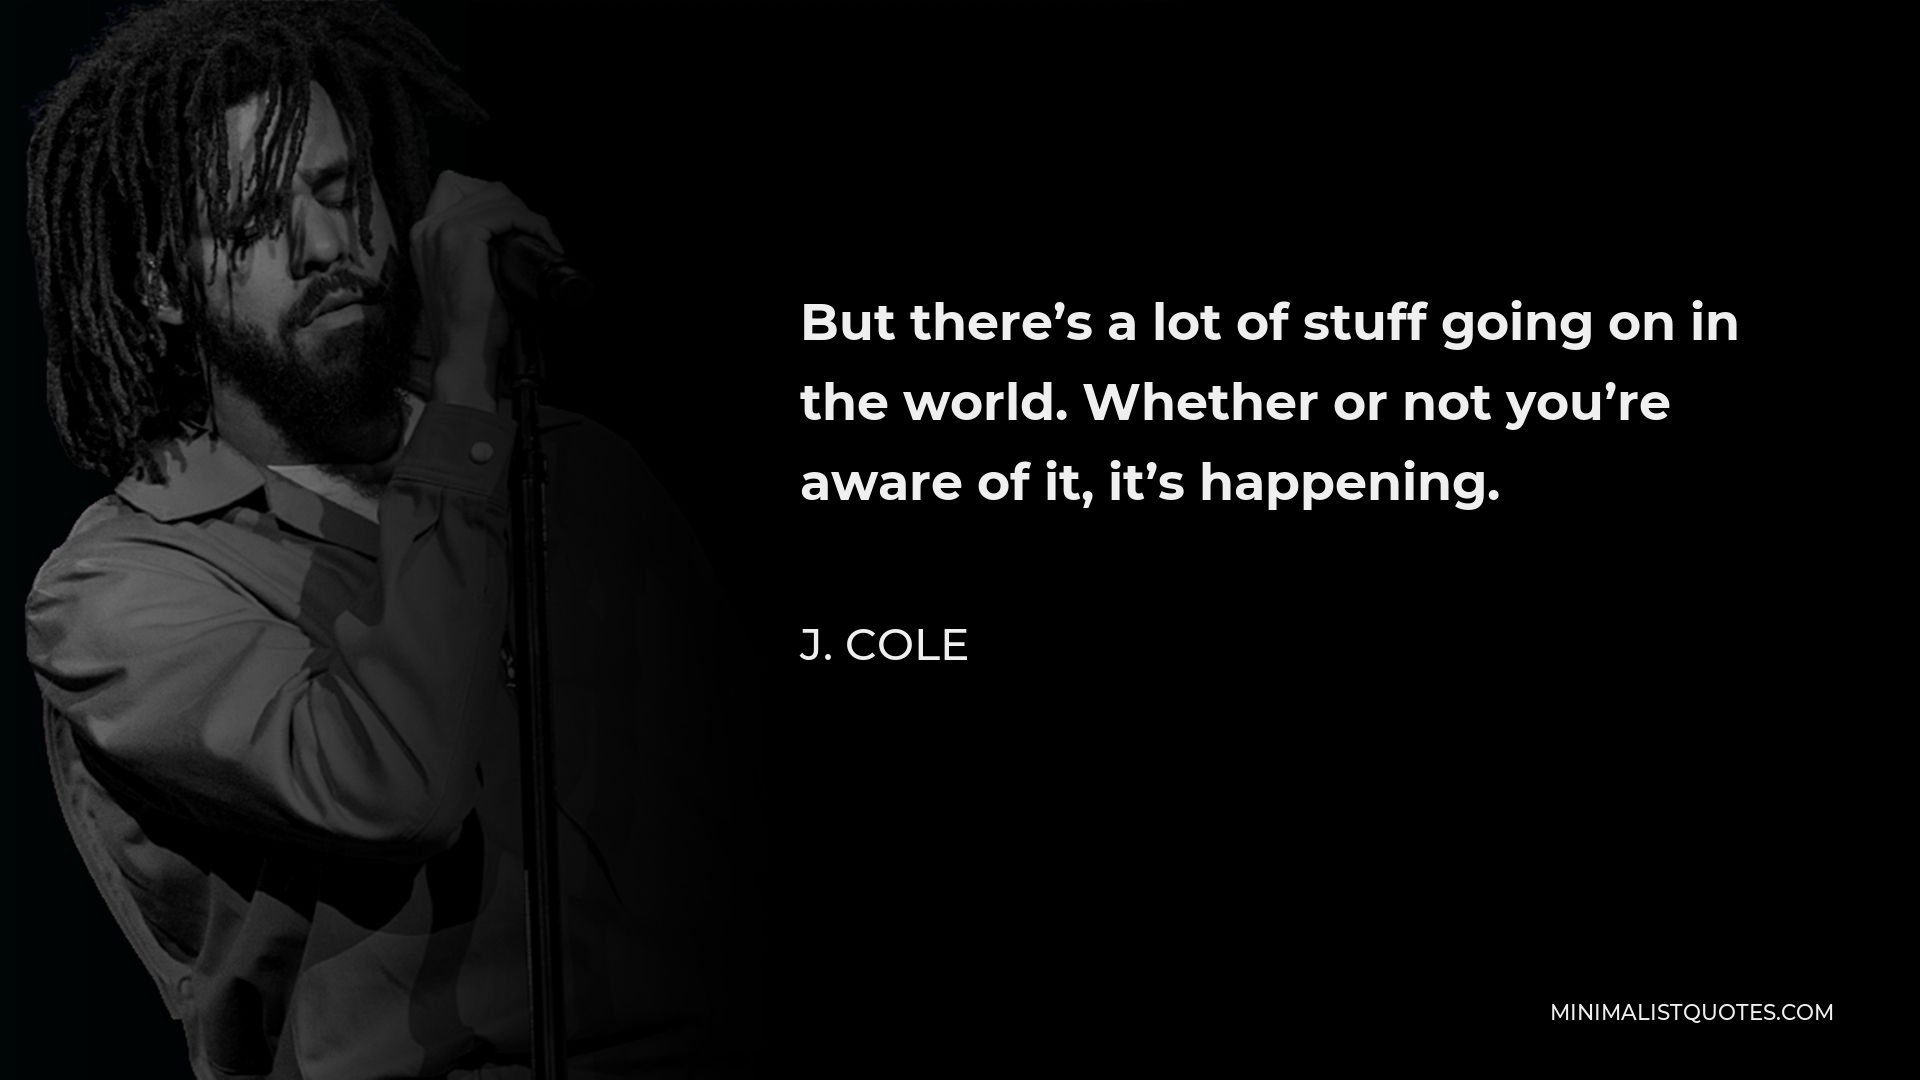 J. Cole Quote - But there’s a lot of stuff going on in the world. Whether or not you’re aware of it, it’s happening.